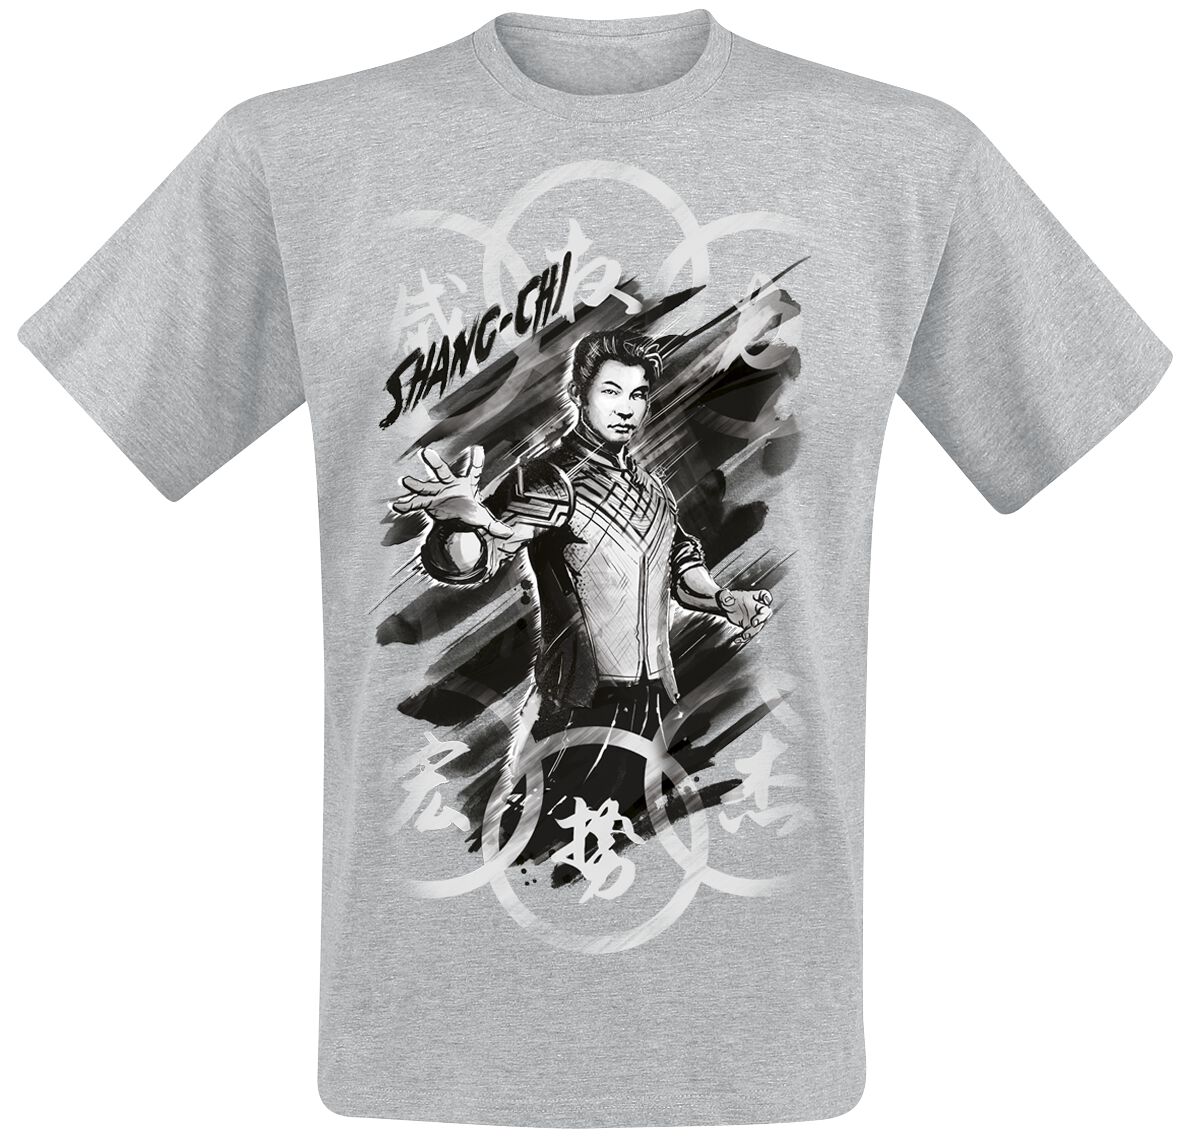 Shang-Chi and the Legend of the Ten Rings Fight T-Shirt mottled grey